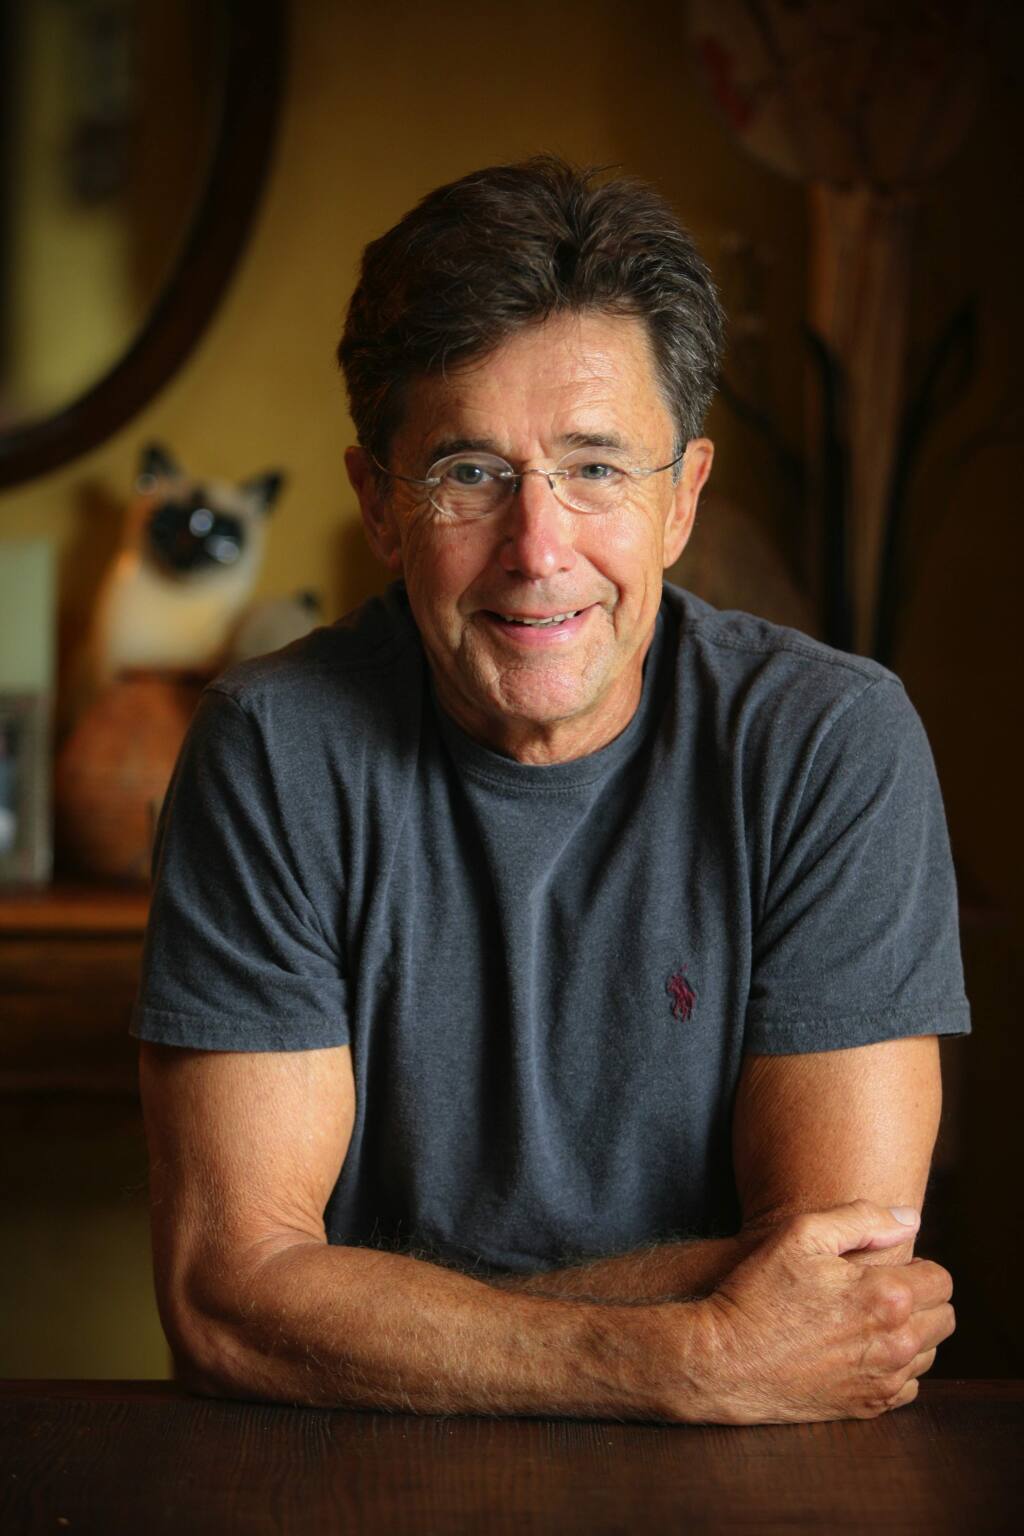 James Conaway, author of many book, including three on the Napa Valley. (Copyright Peter Menzel)